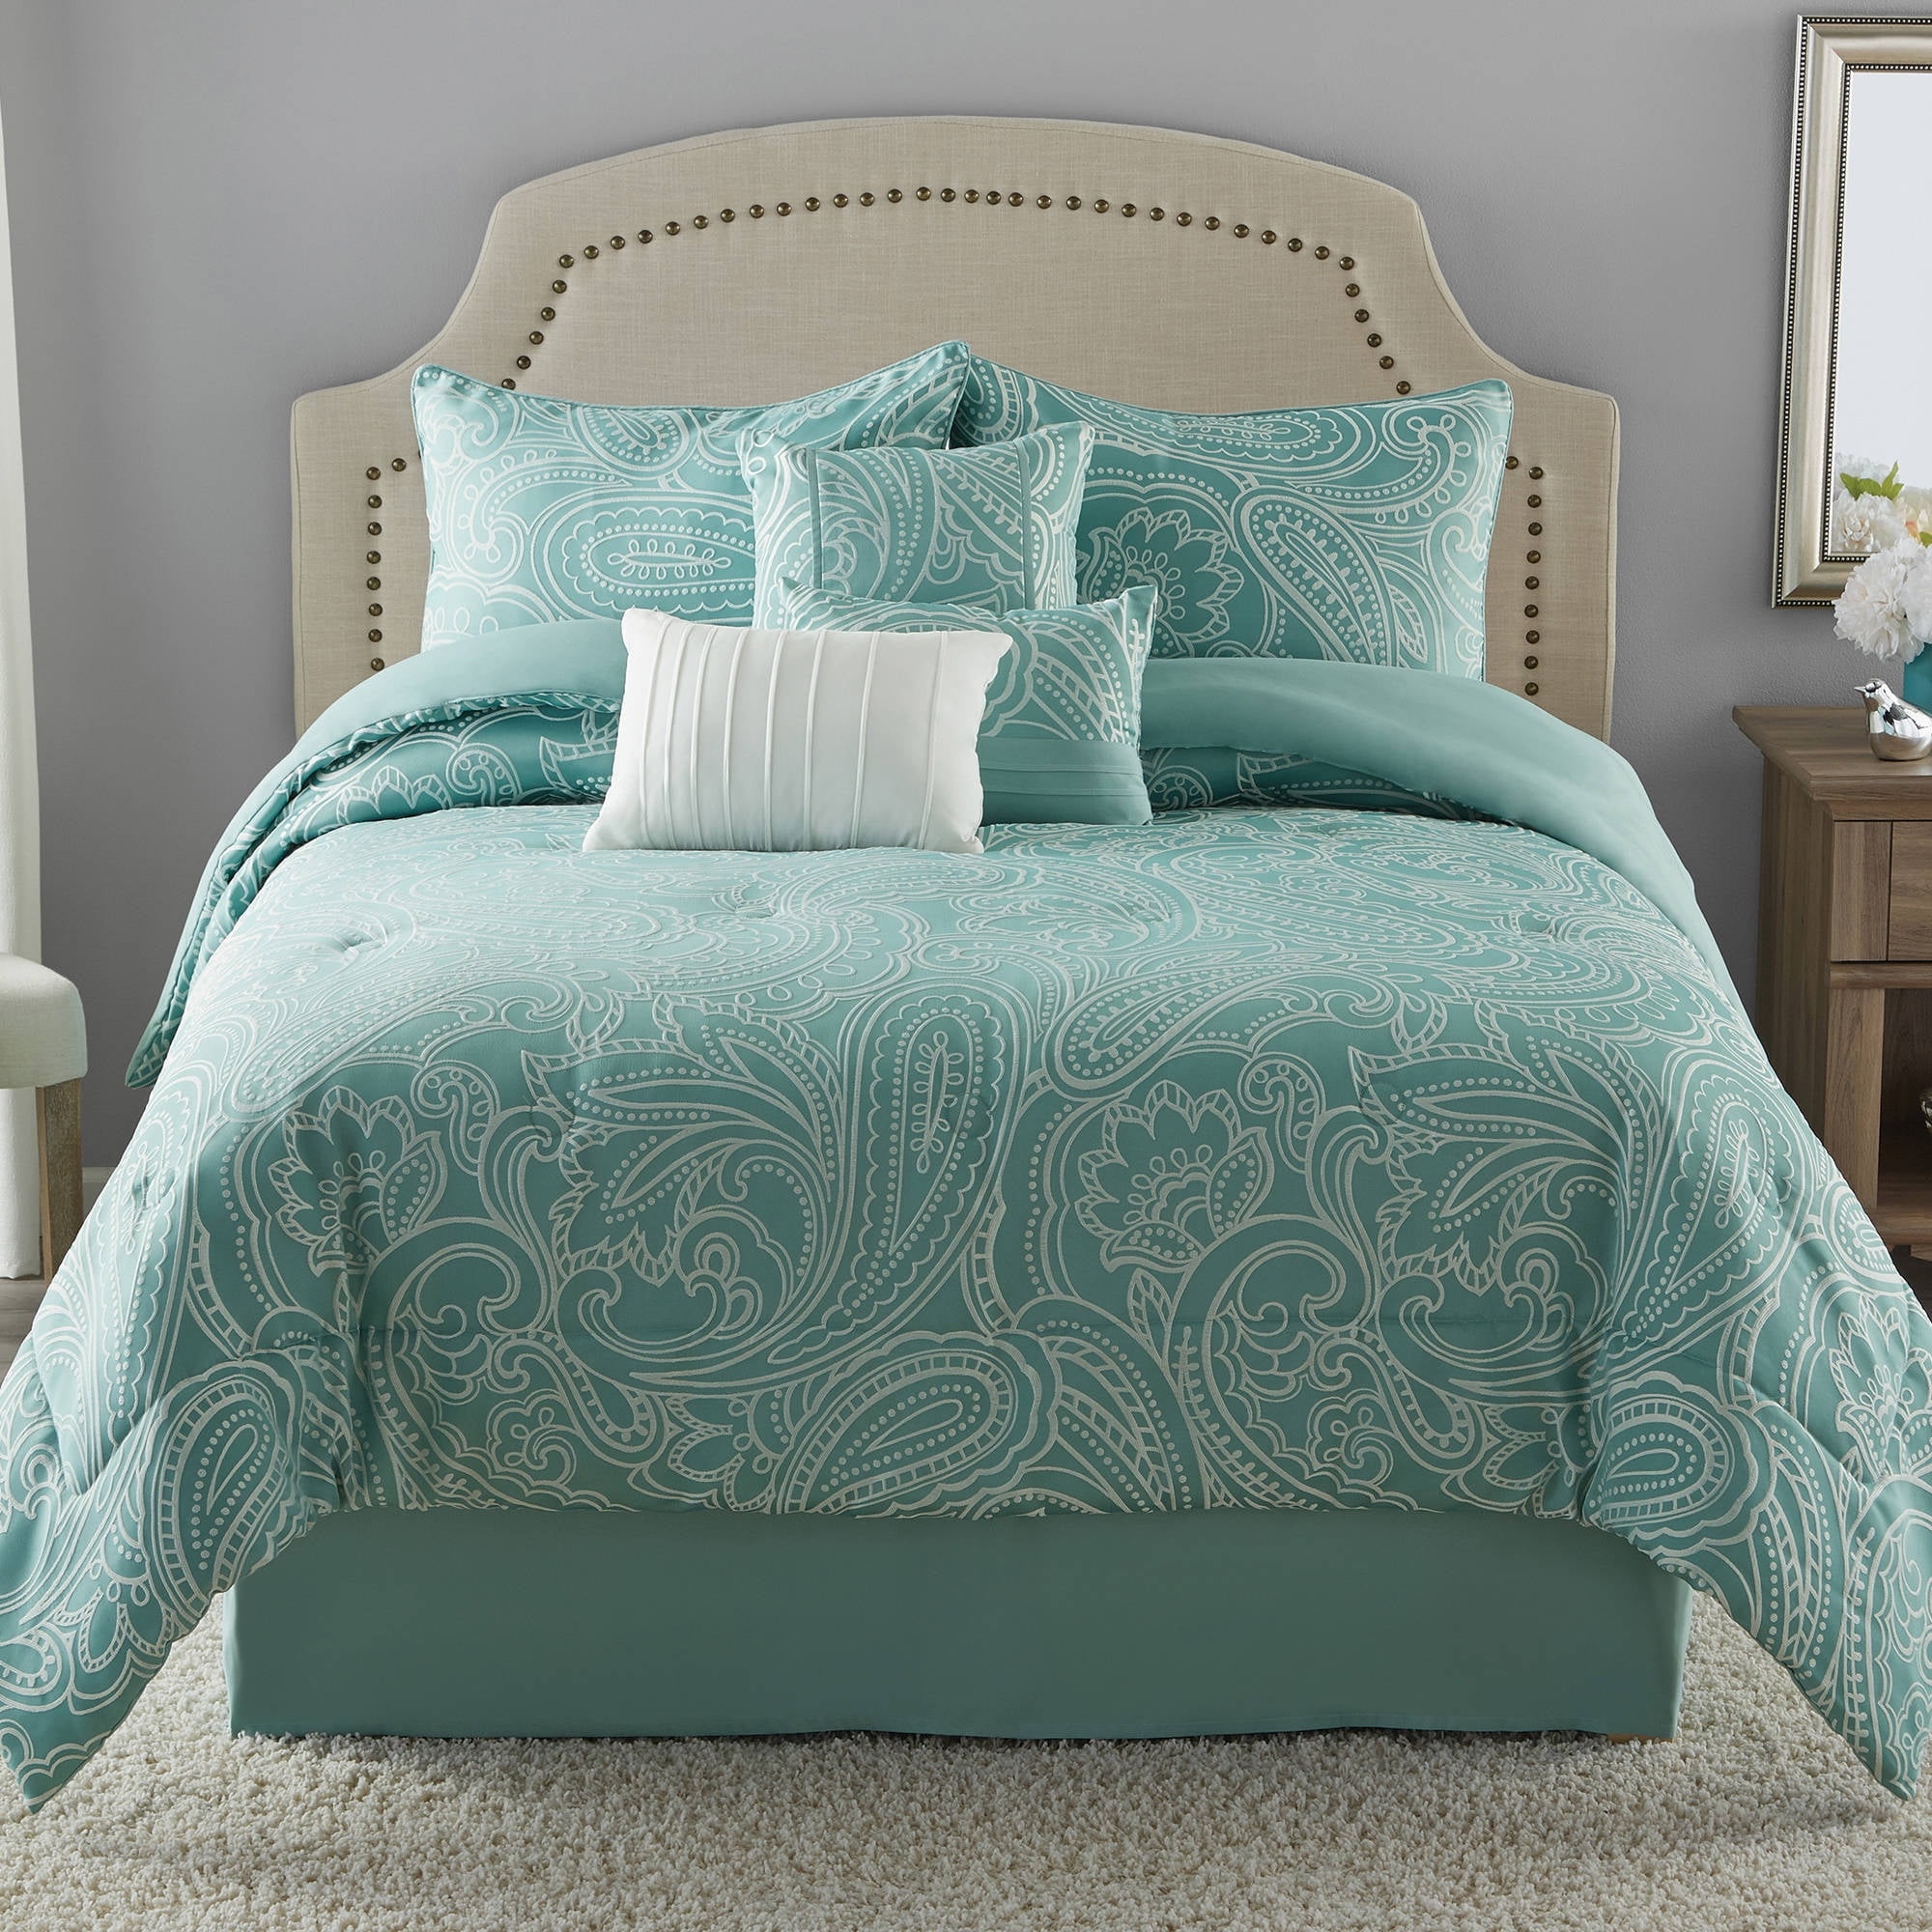 Teal FREE FAST SHIP Full Queen Mainstays 7 Piece Paisley Damask Comforter Set 